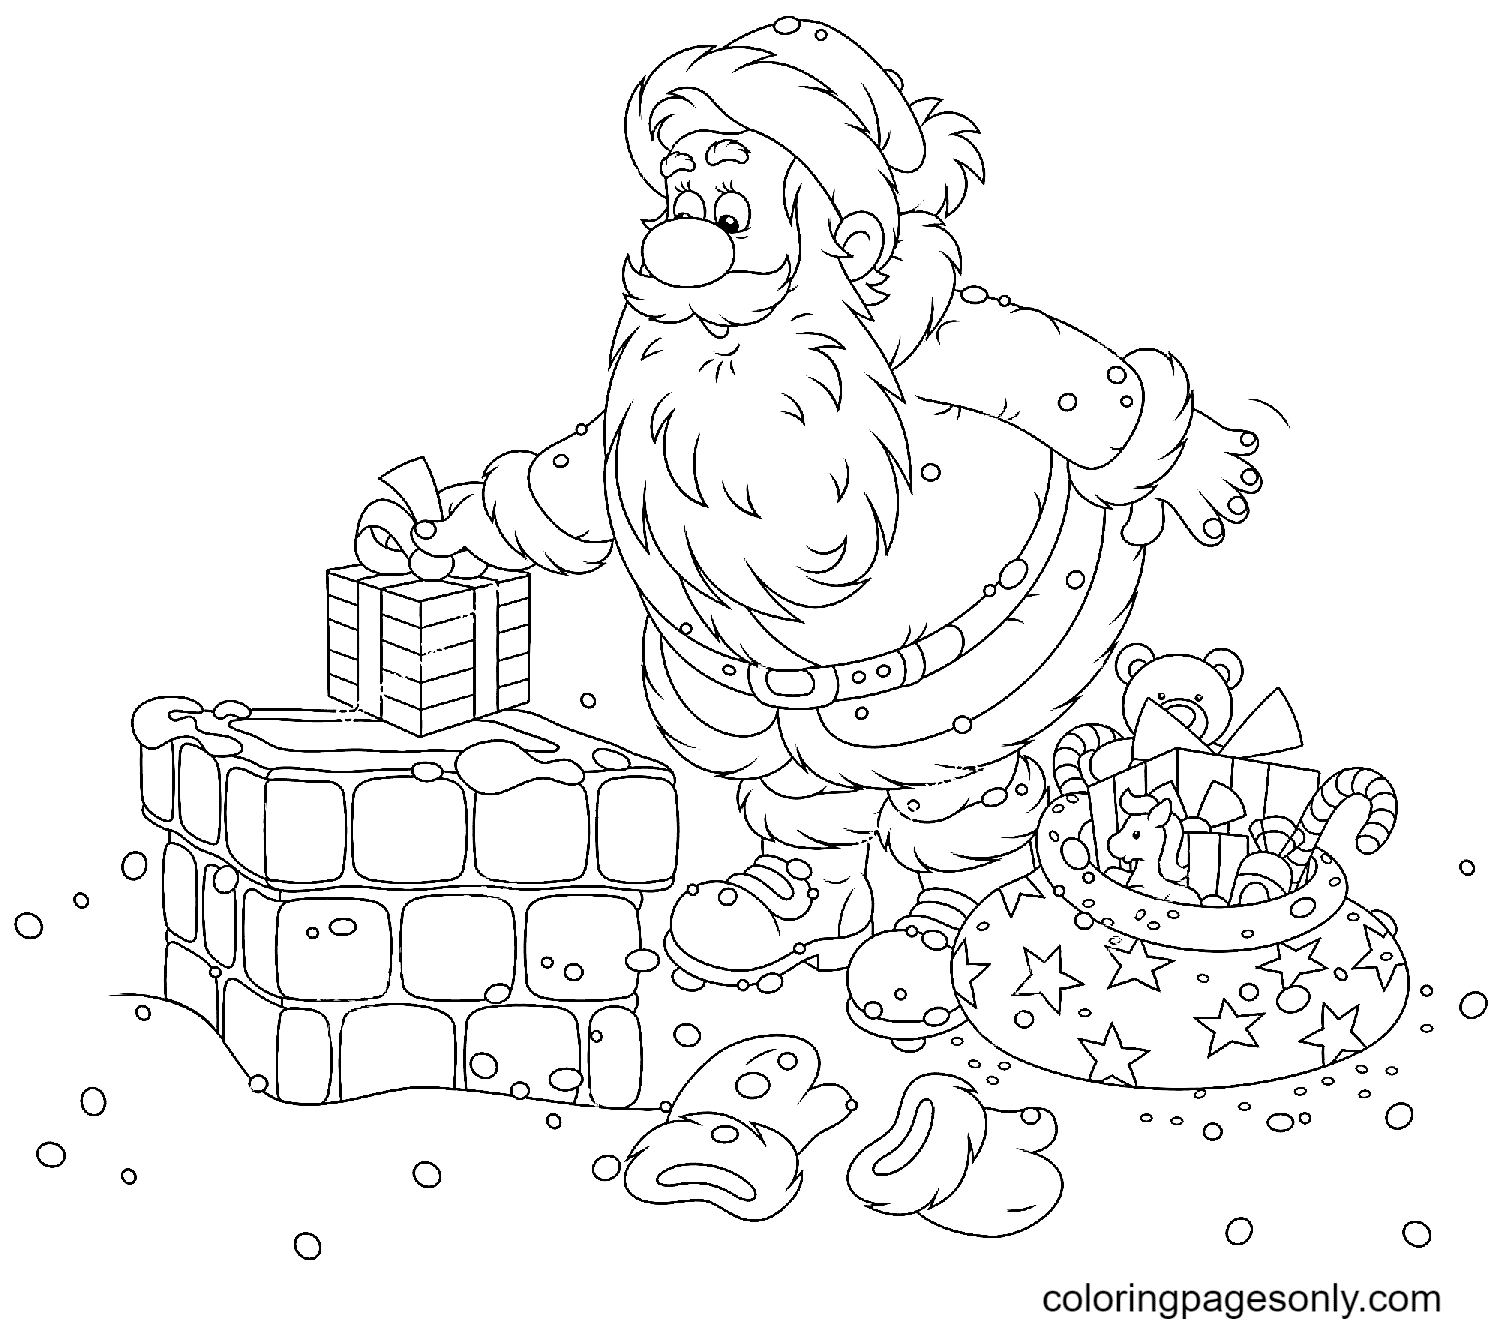 Santa Claus with Christmas Gifts on A Hhousetop Coloring Page